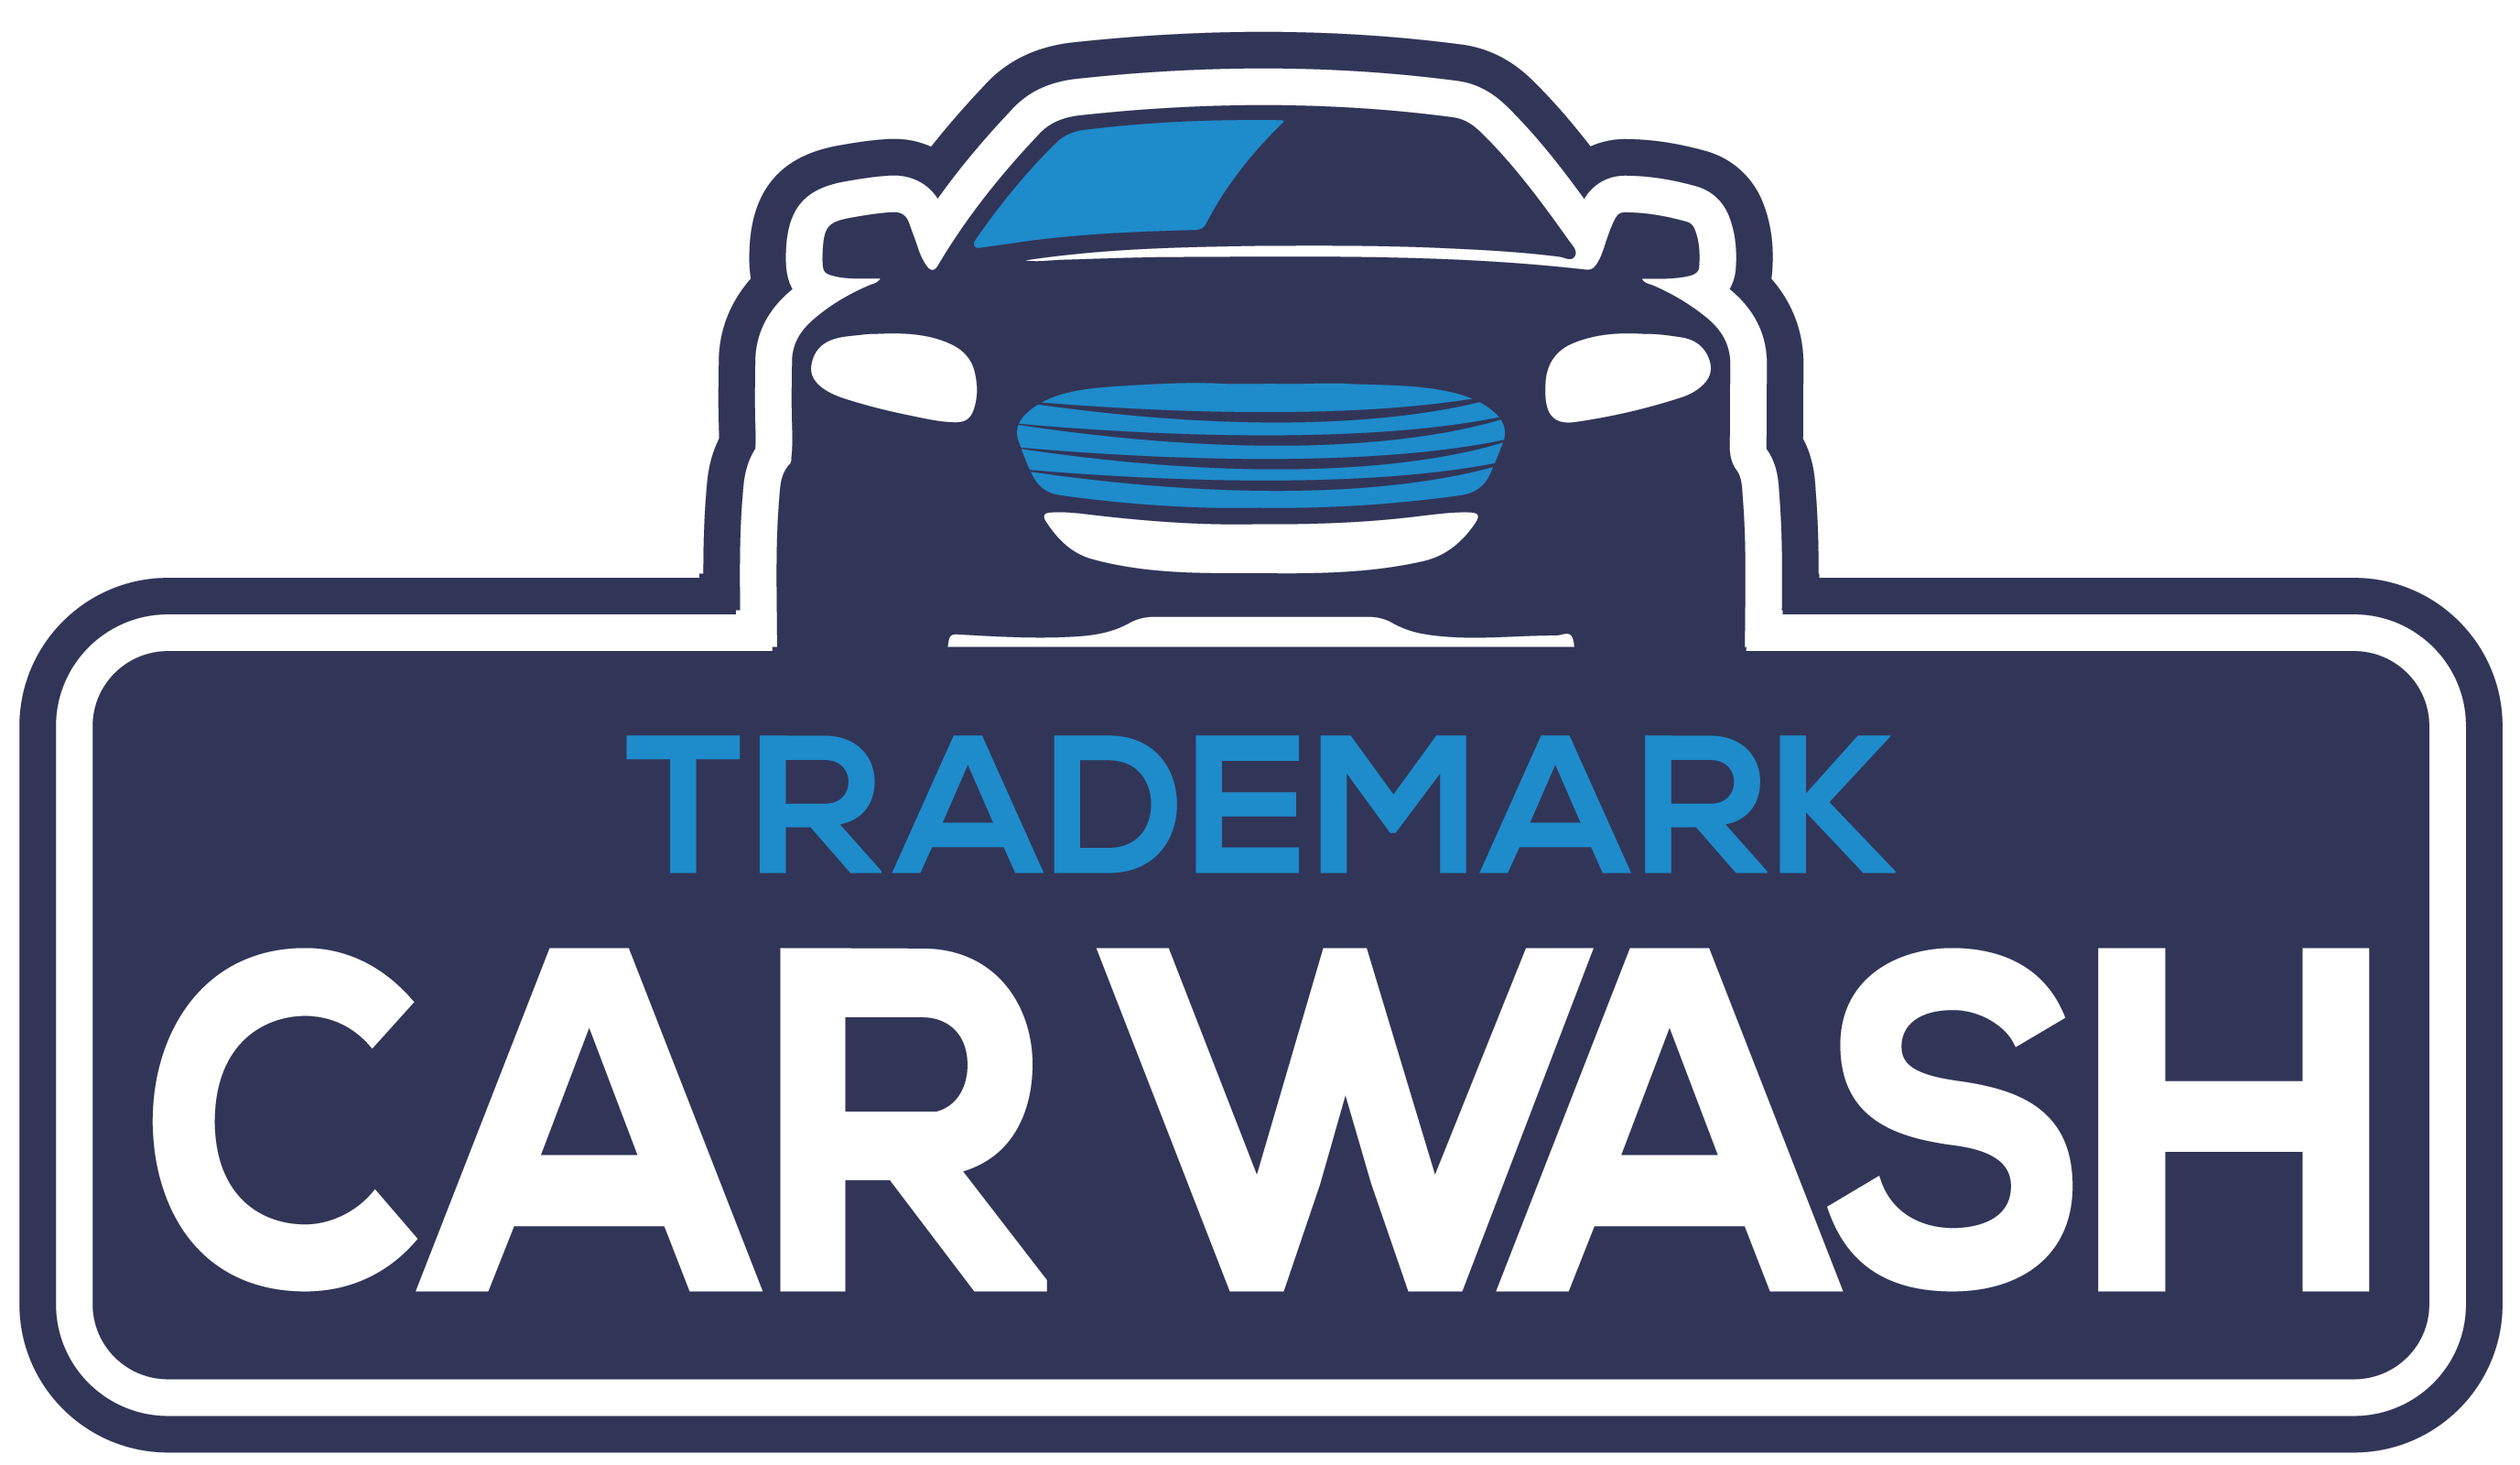 Welcome to Trademark Car Wash